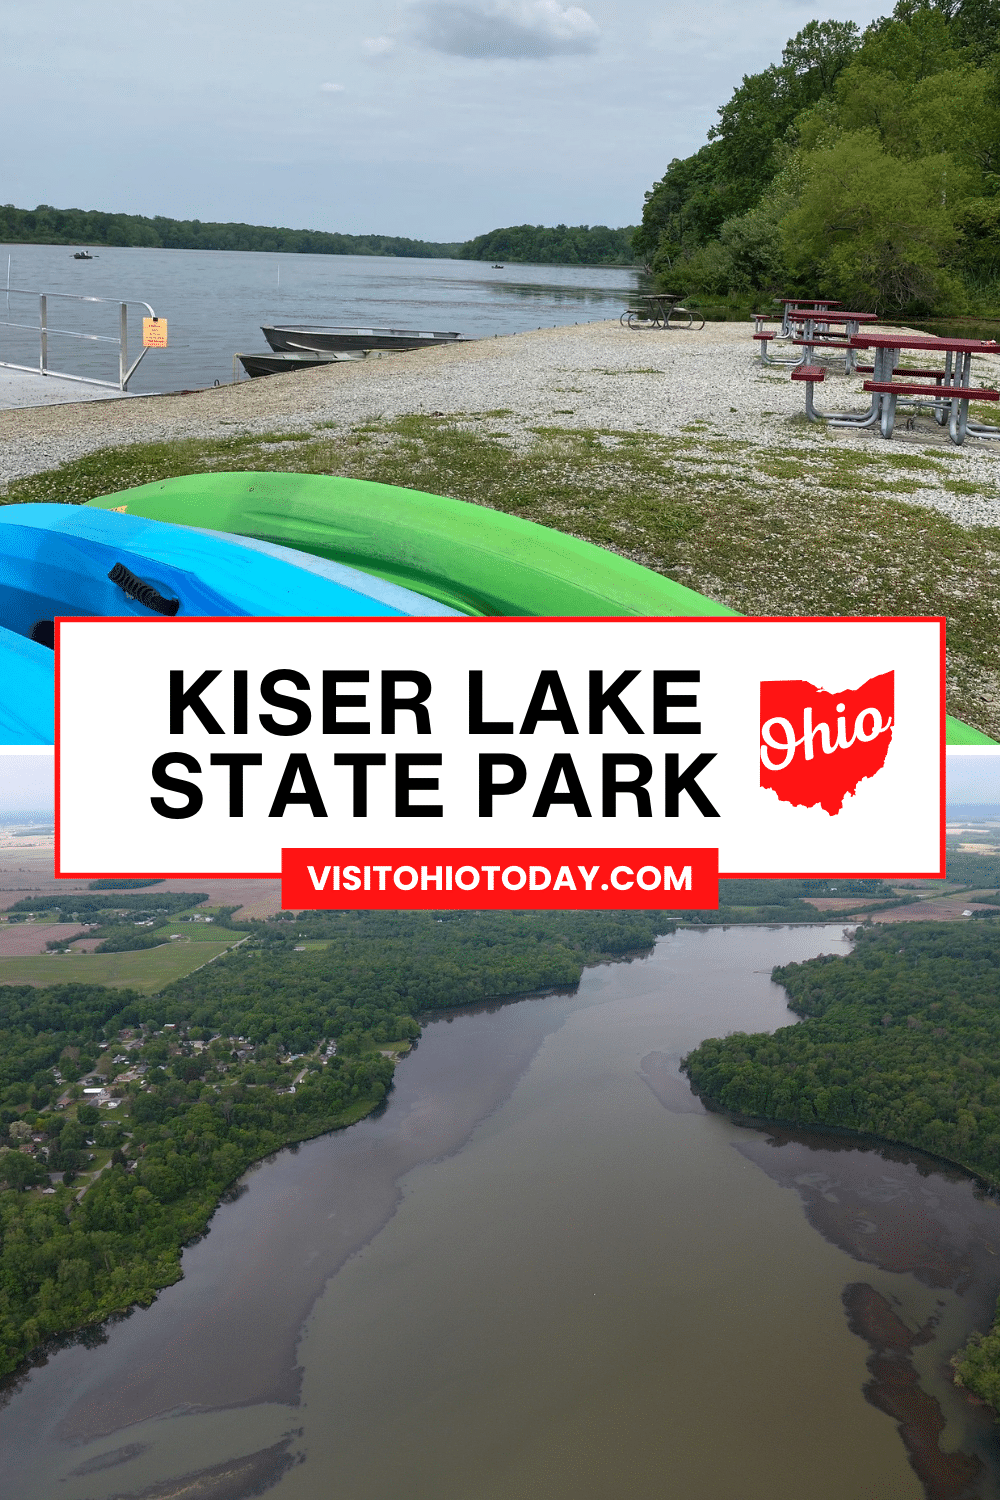 Kiser Lake State Park is in Conover, Champaign County in southwest Ohio. This 531-acre State Park has a lot of activities available, many of which are water activities on the 396-acre Kiser Lake.